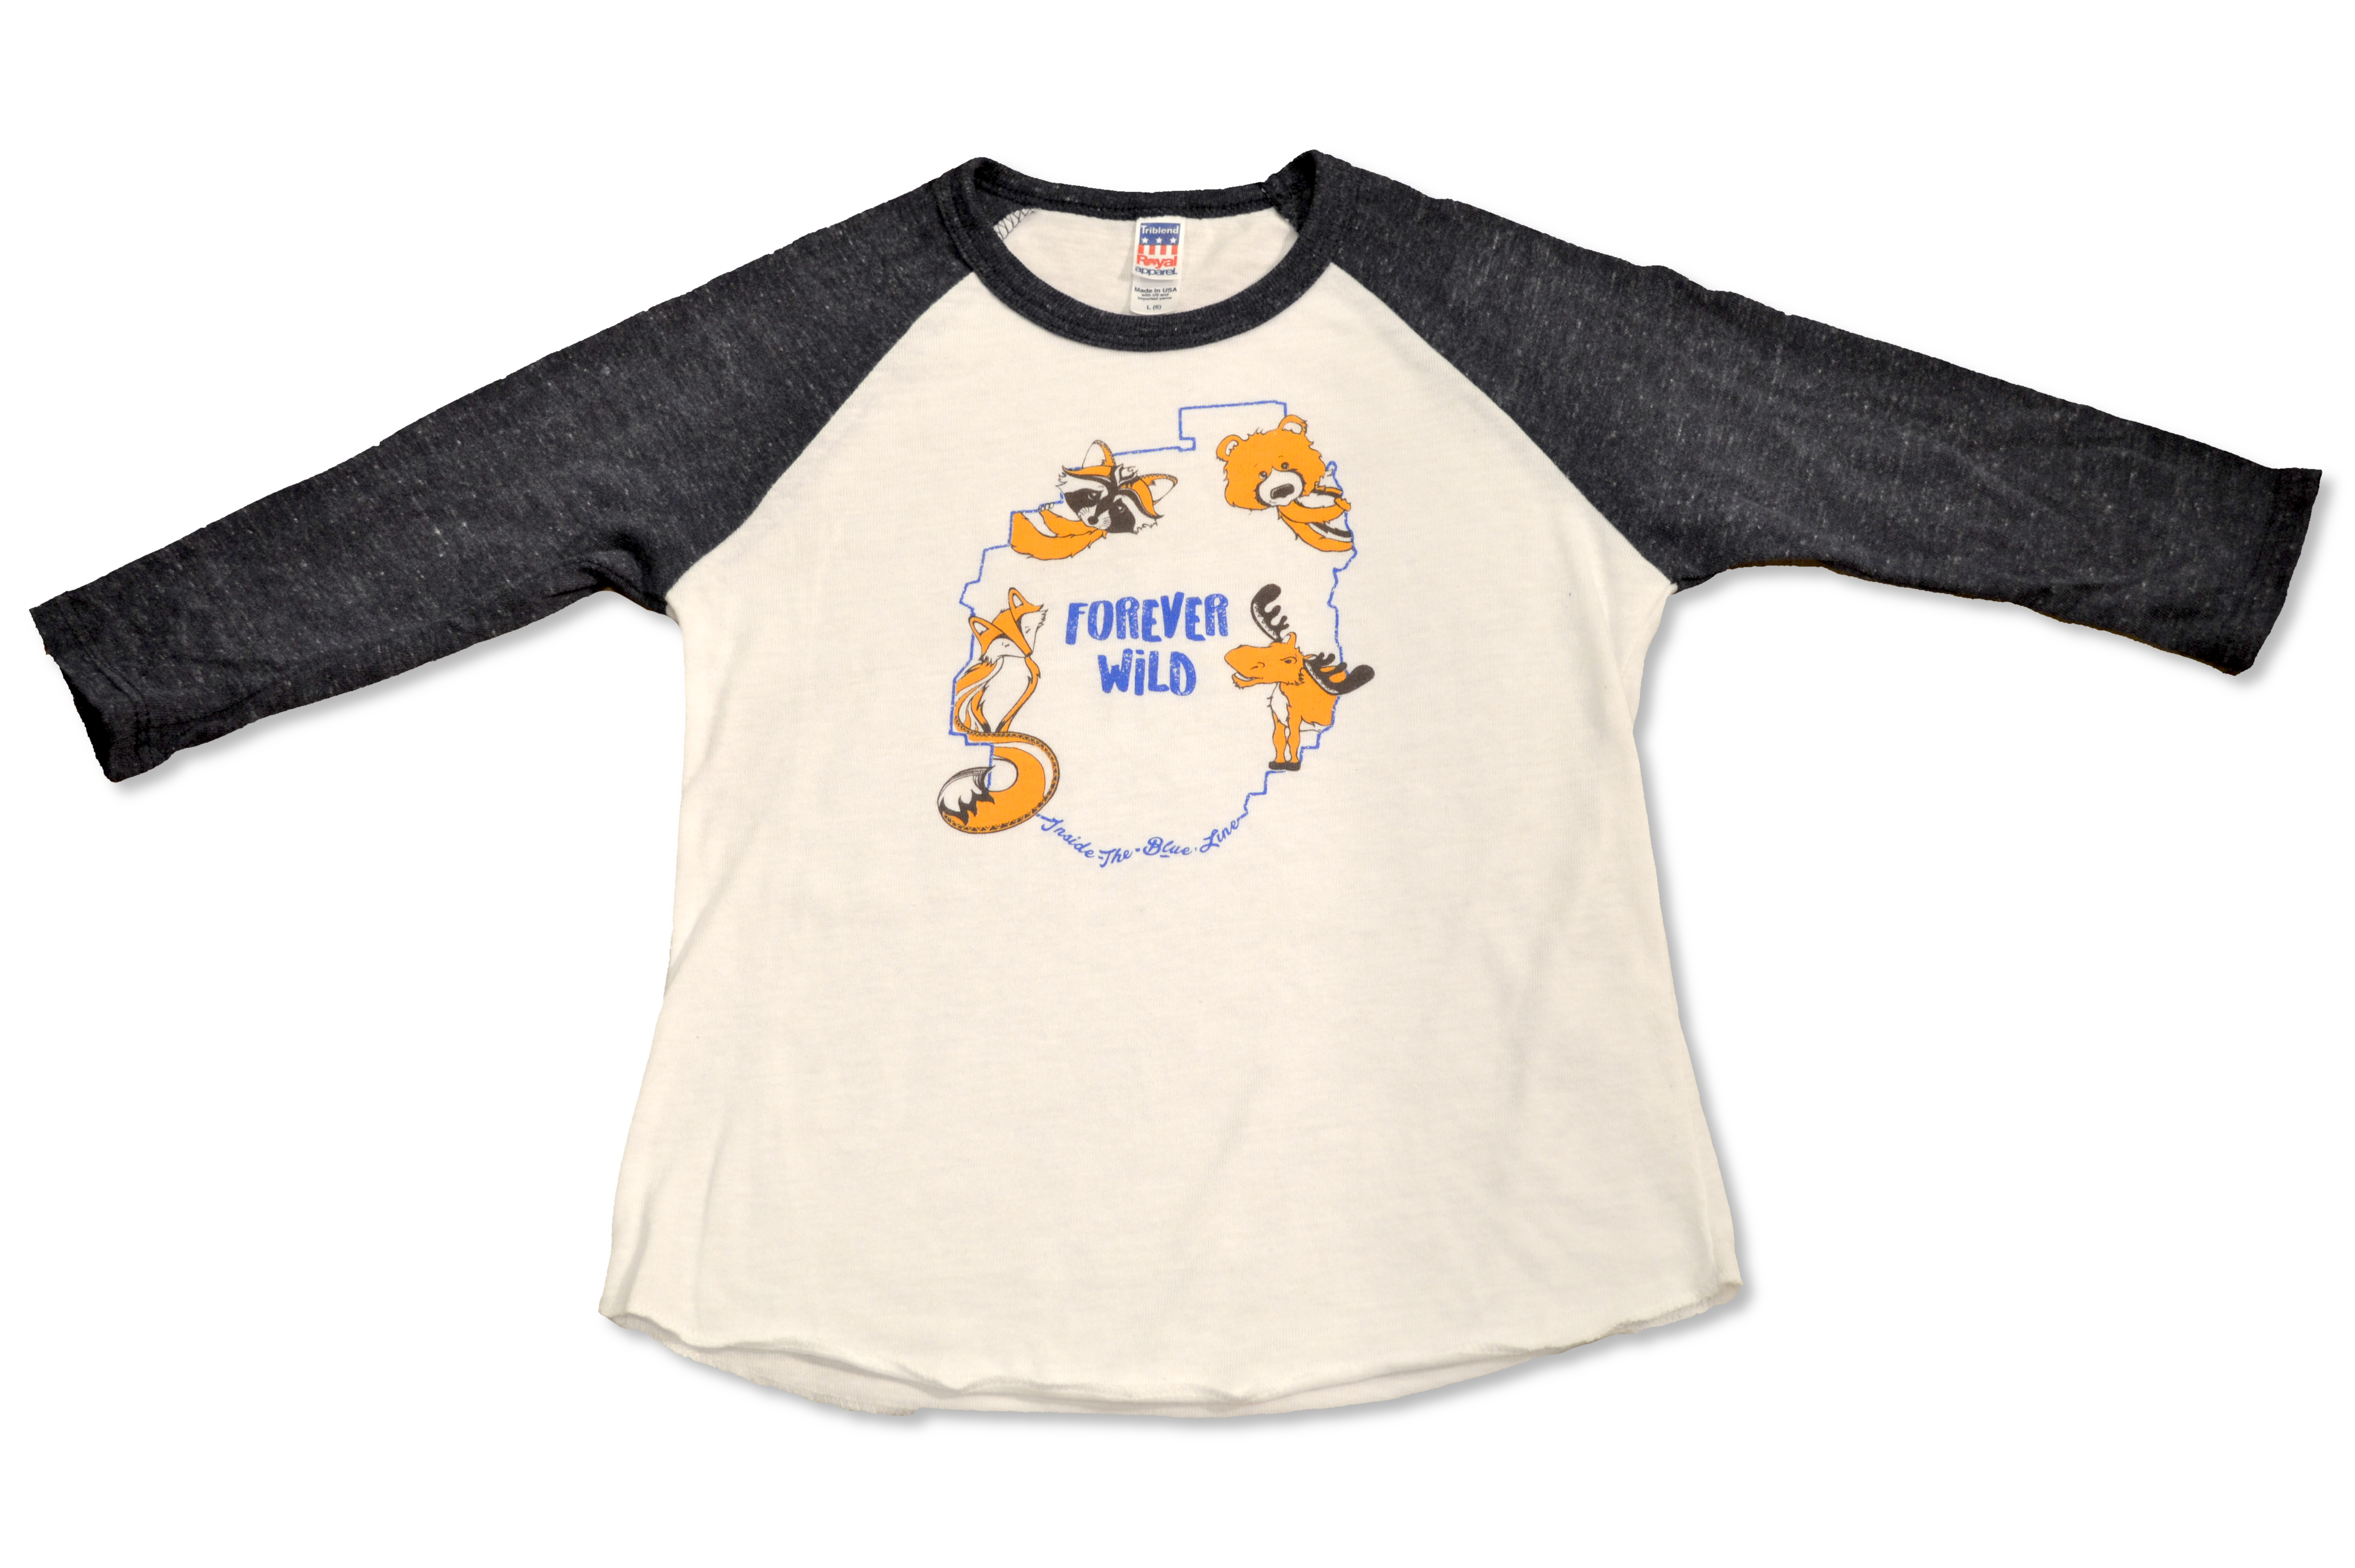 The Forever Wild Tee - Toddler T-Shirt Blue